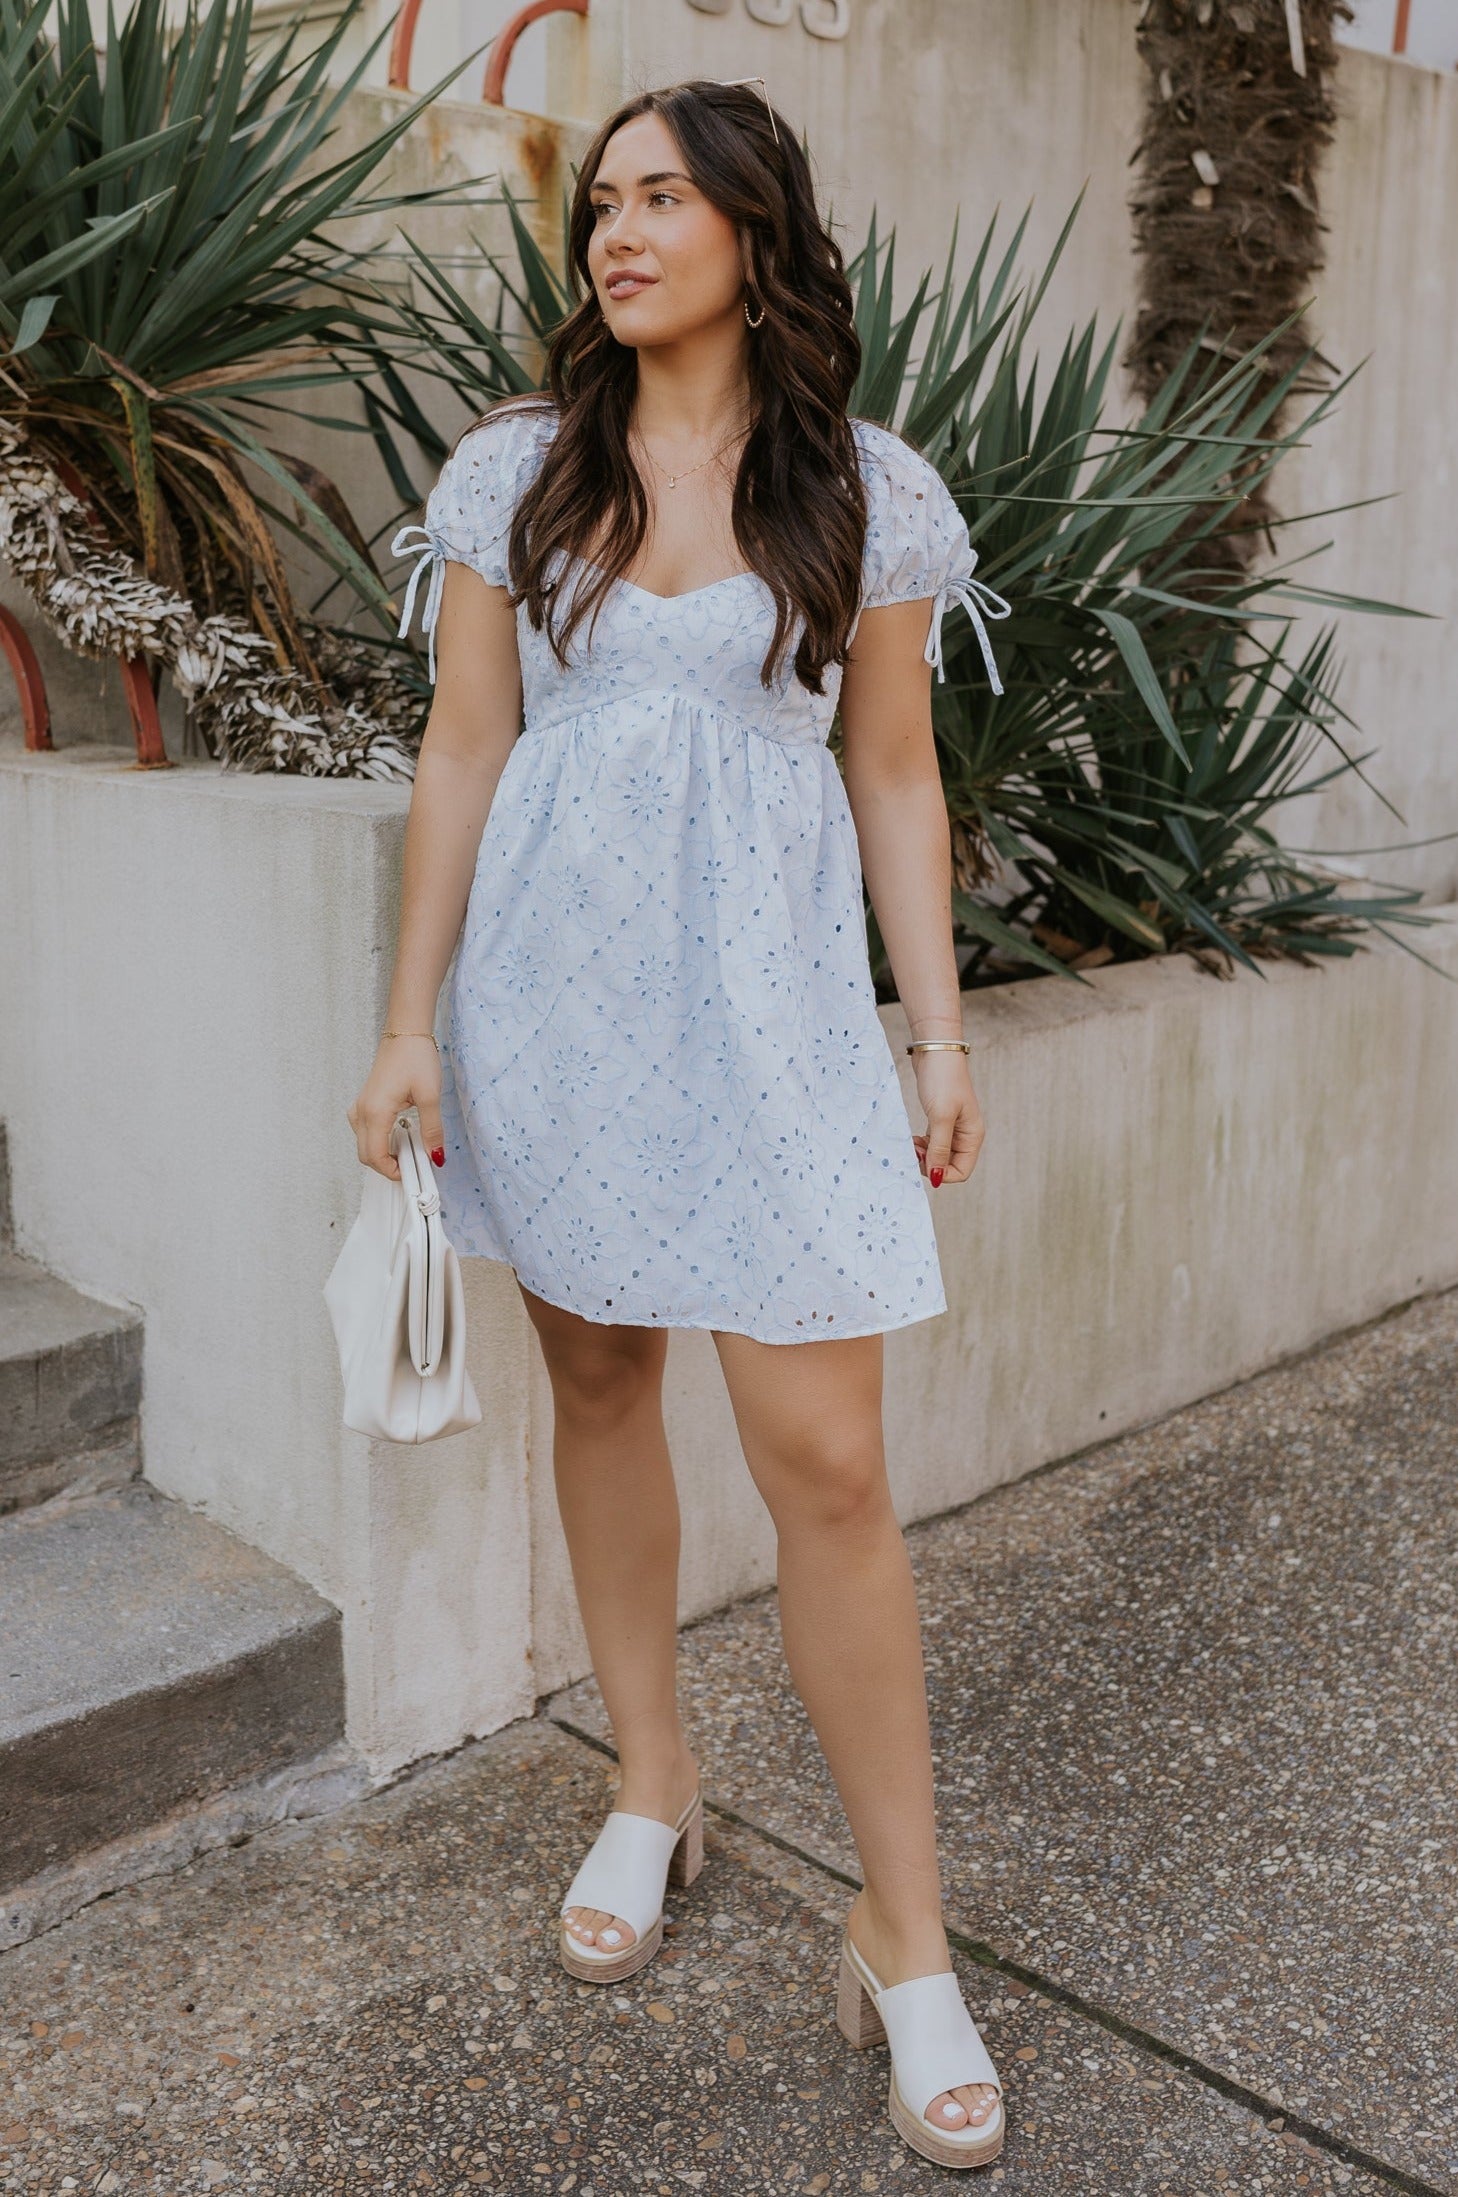 Full body view of female model wearing the The Ella Light Blue Eyelet Mini Dress which features light blue cotton fabric with an eyelet floral pattern, mini length, light blue lining, a sweetheart neckline, short puff sleeves with tie details, and a smocked back.